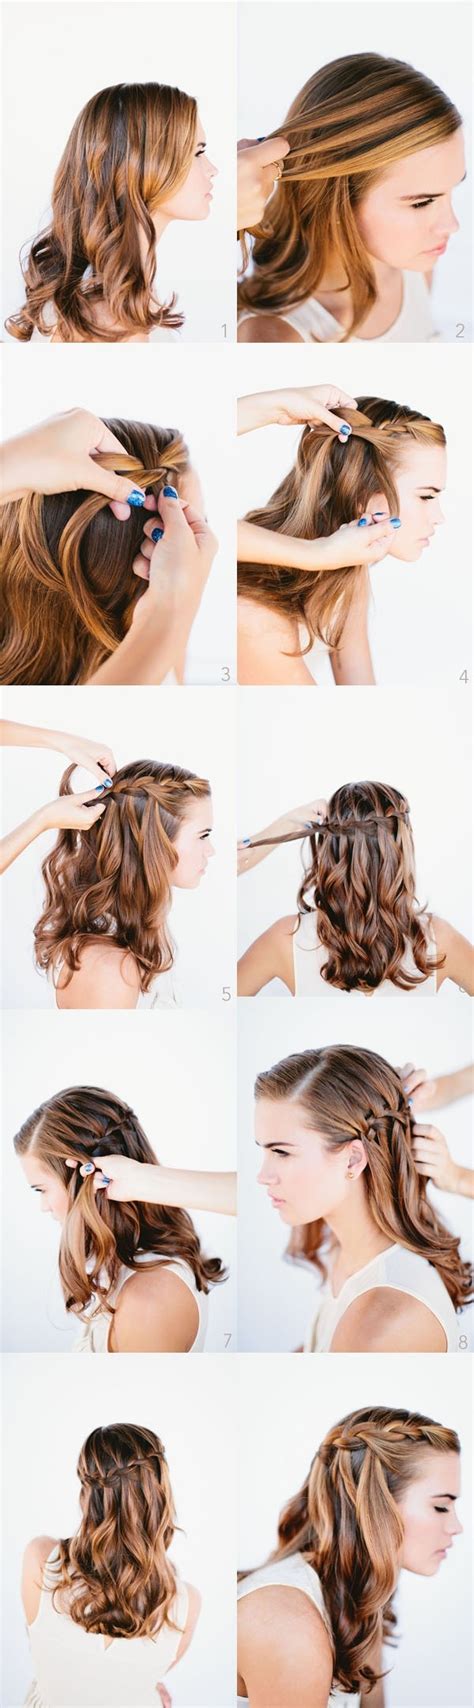 cute hairstyles musely